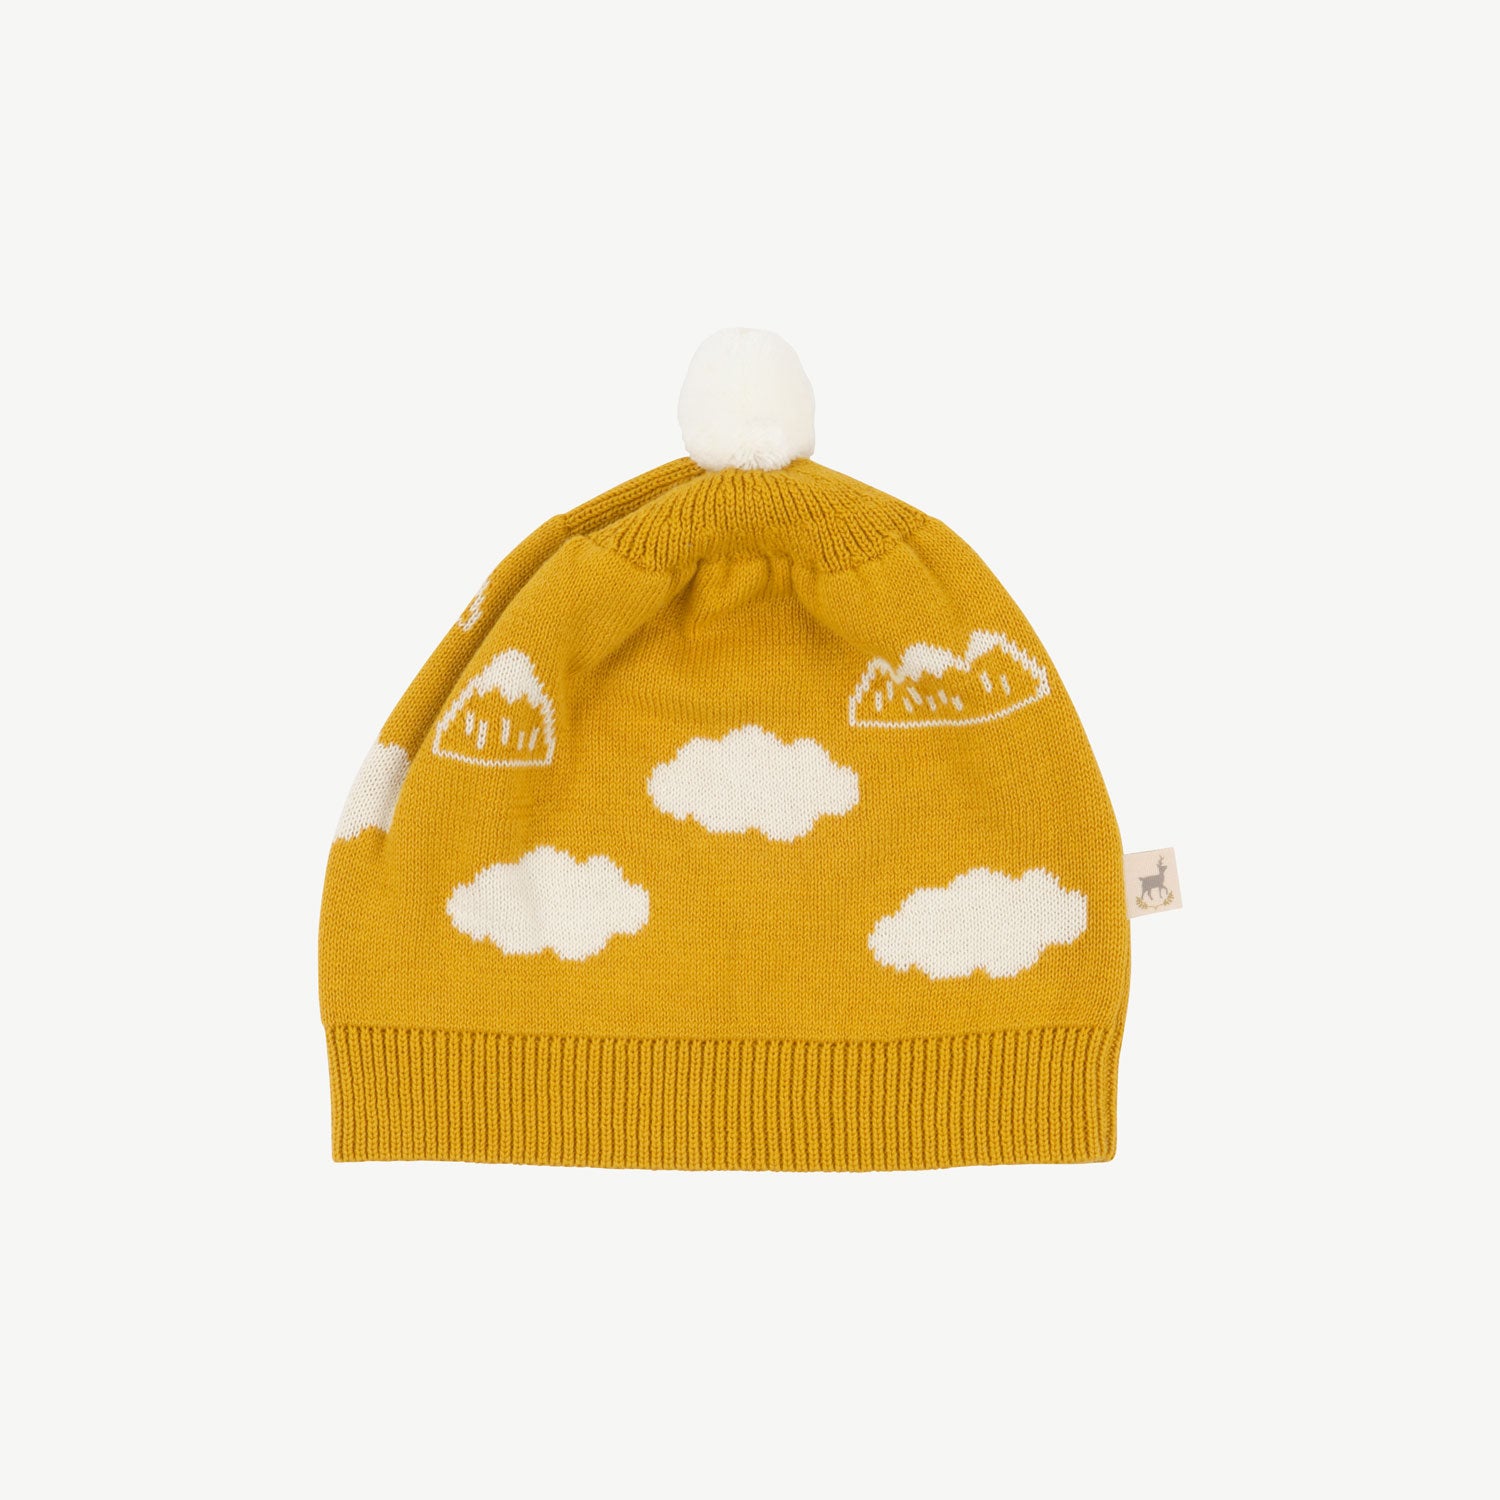 'mountain's view' nugget gold knit beanie